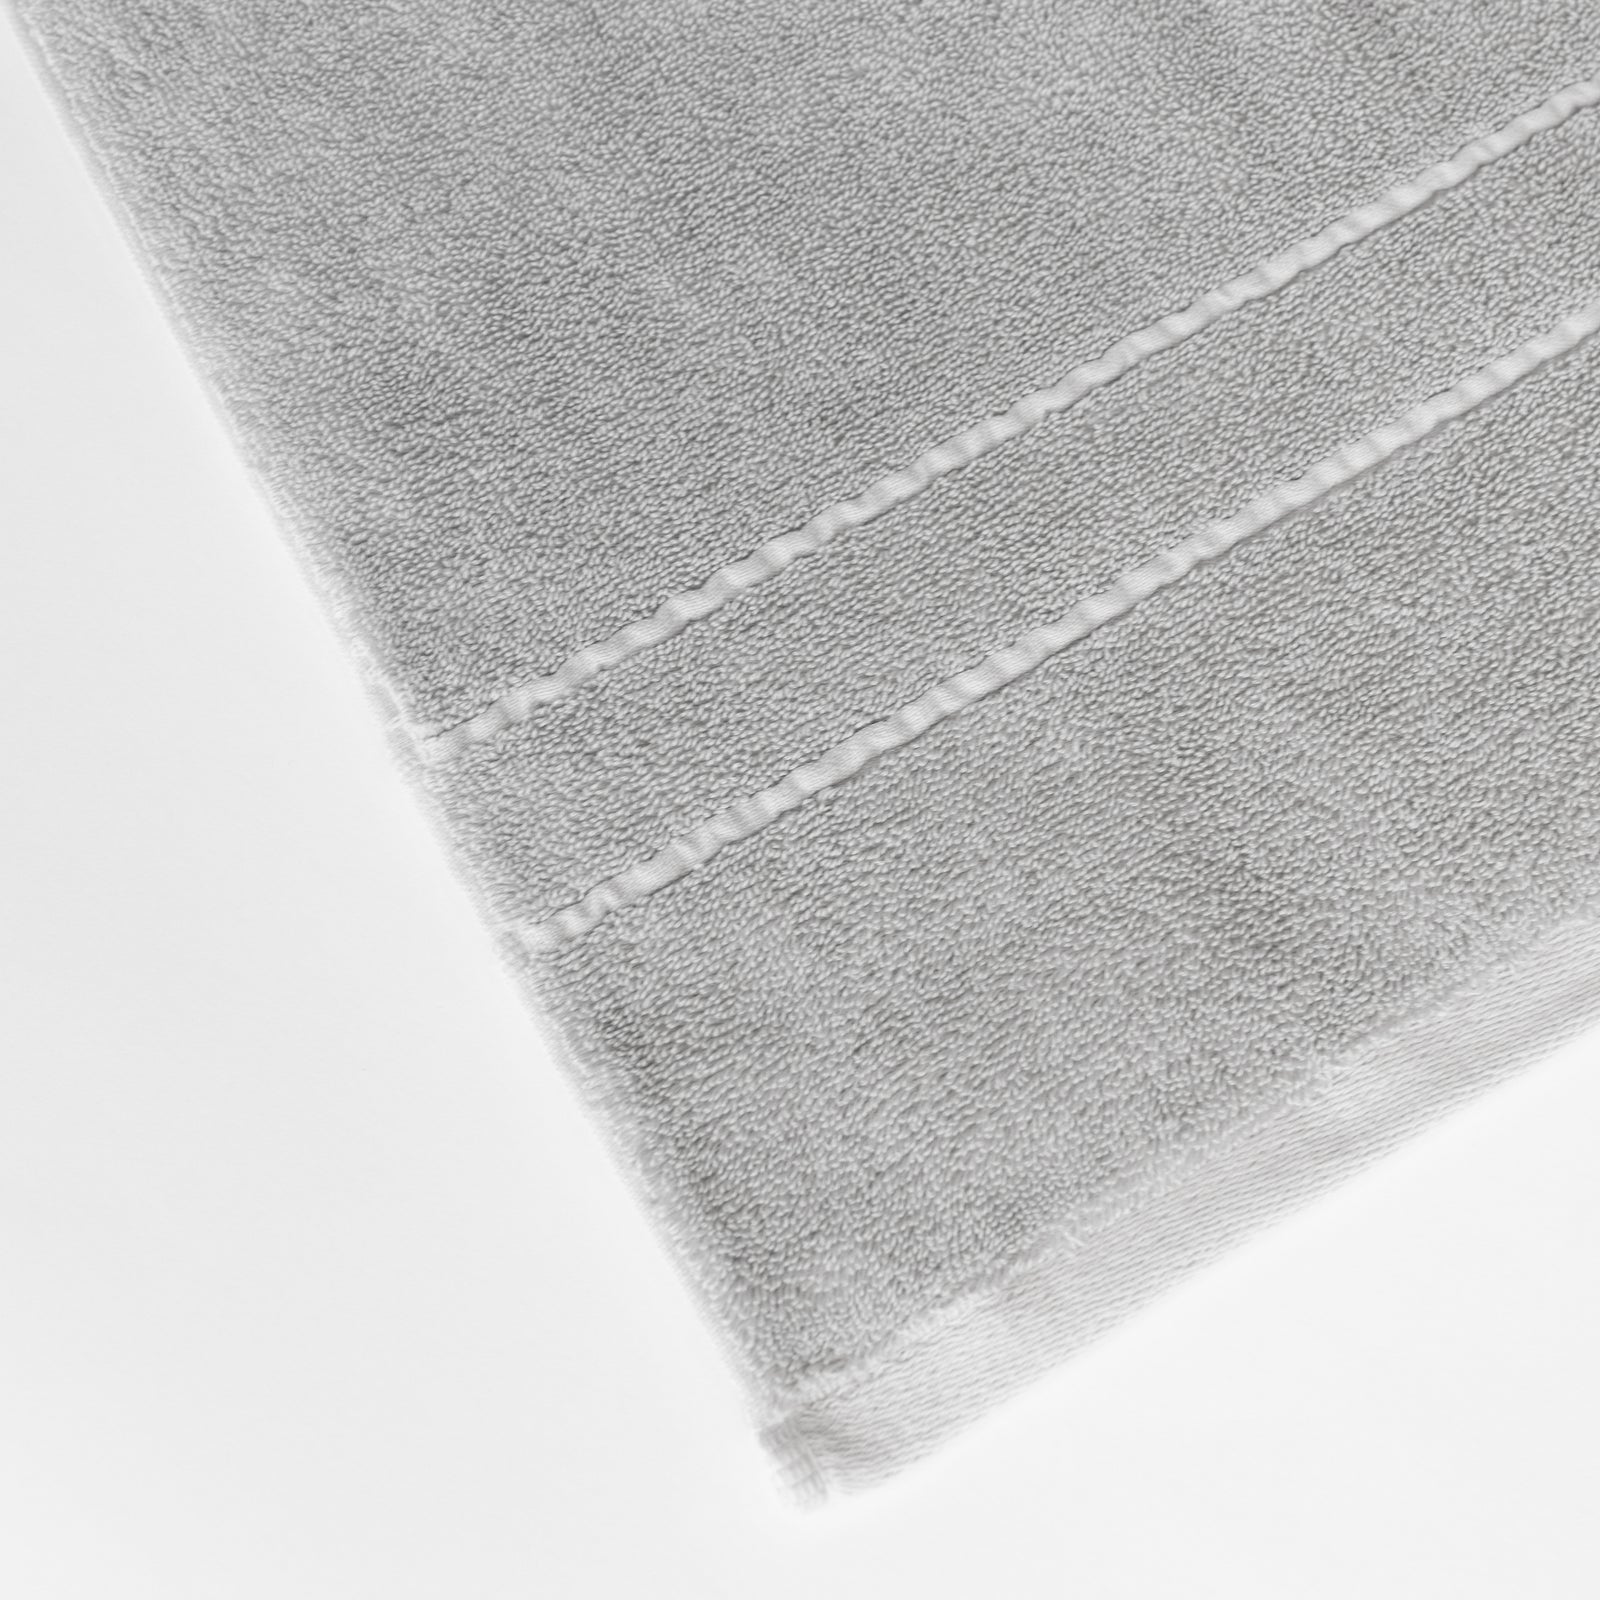 Premium Plush Bath Towels in the color Light Grey. Photo of Premium Plush Bath Towels taken on a white background showing only the corner of the towel. 